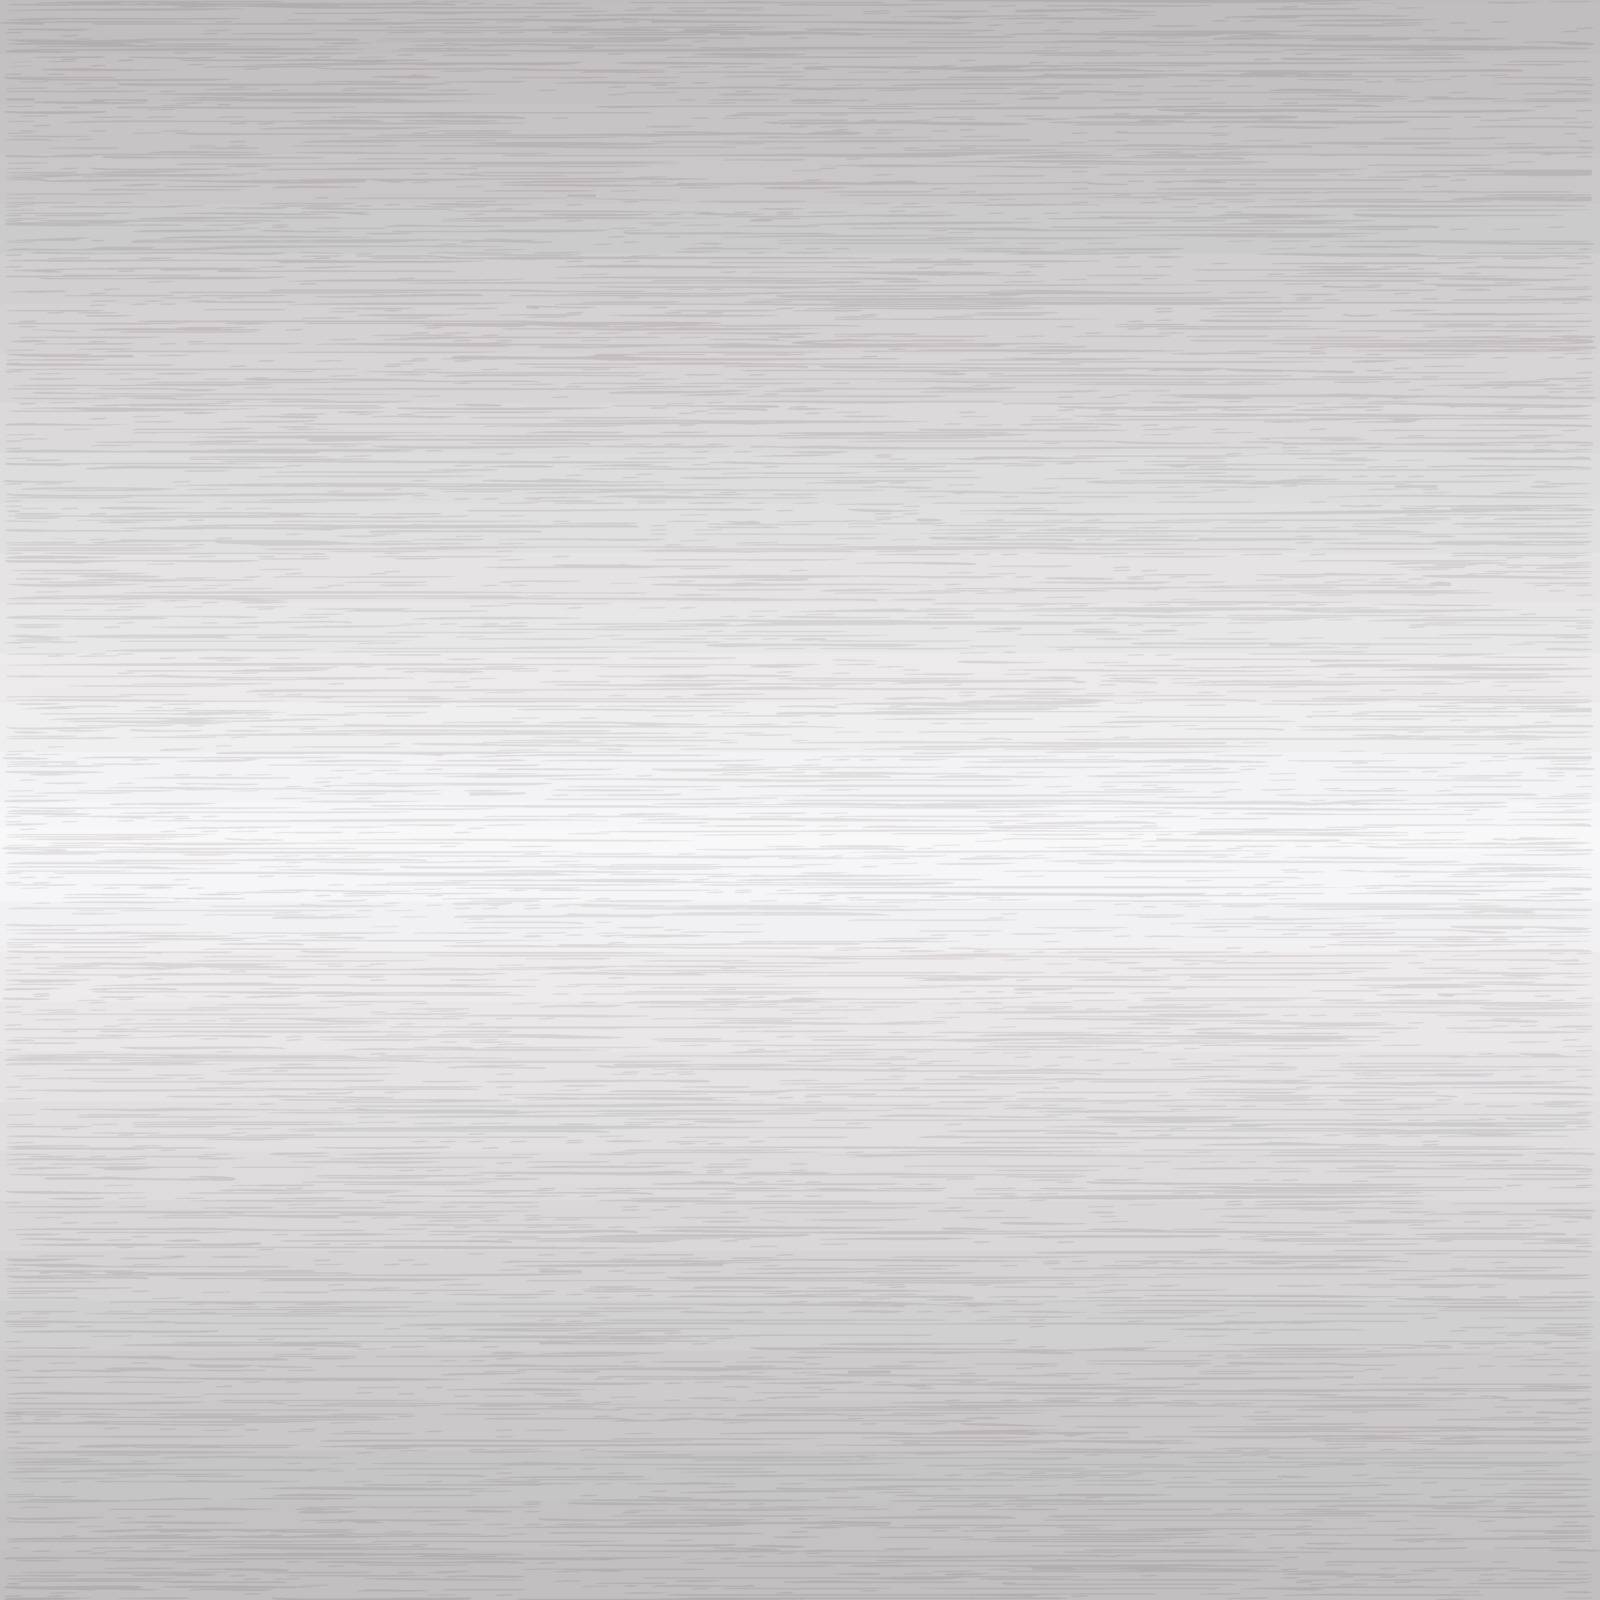 brushed silver surface by Istanbul2009